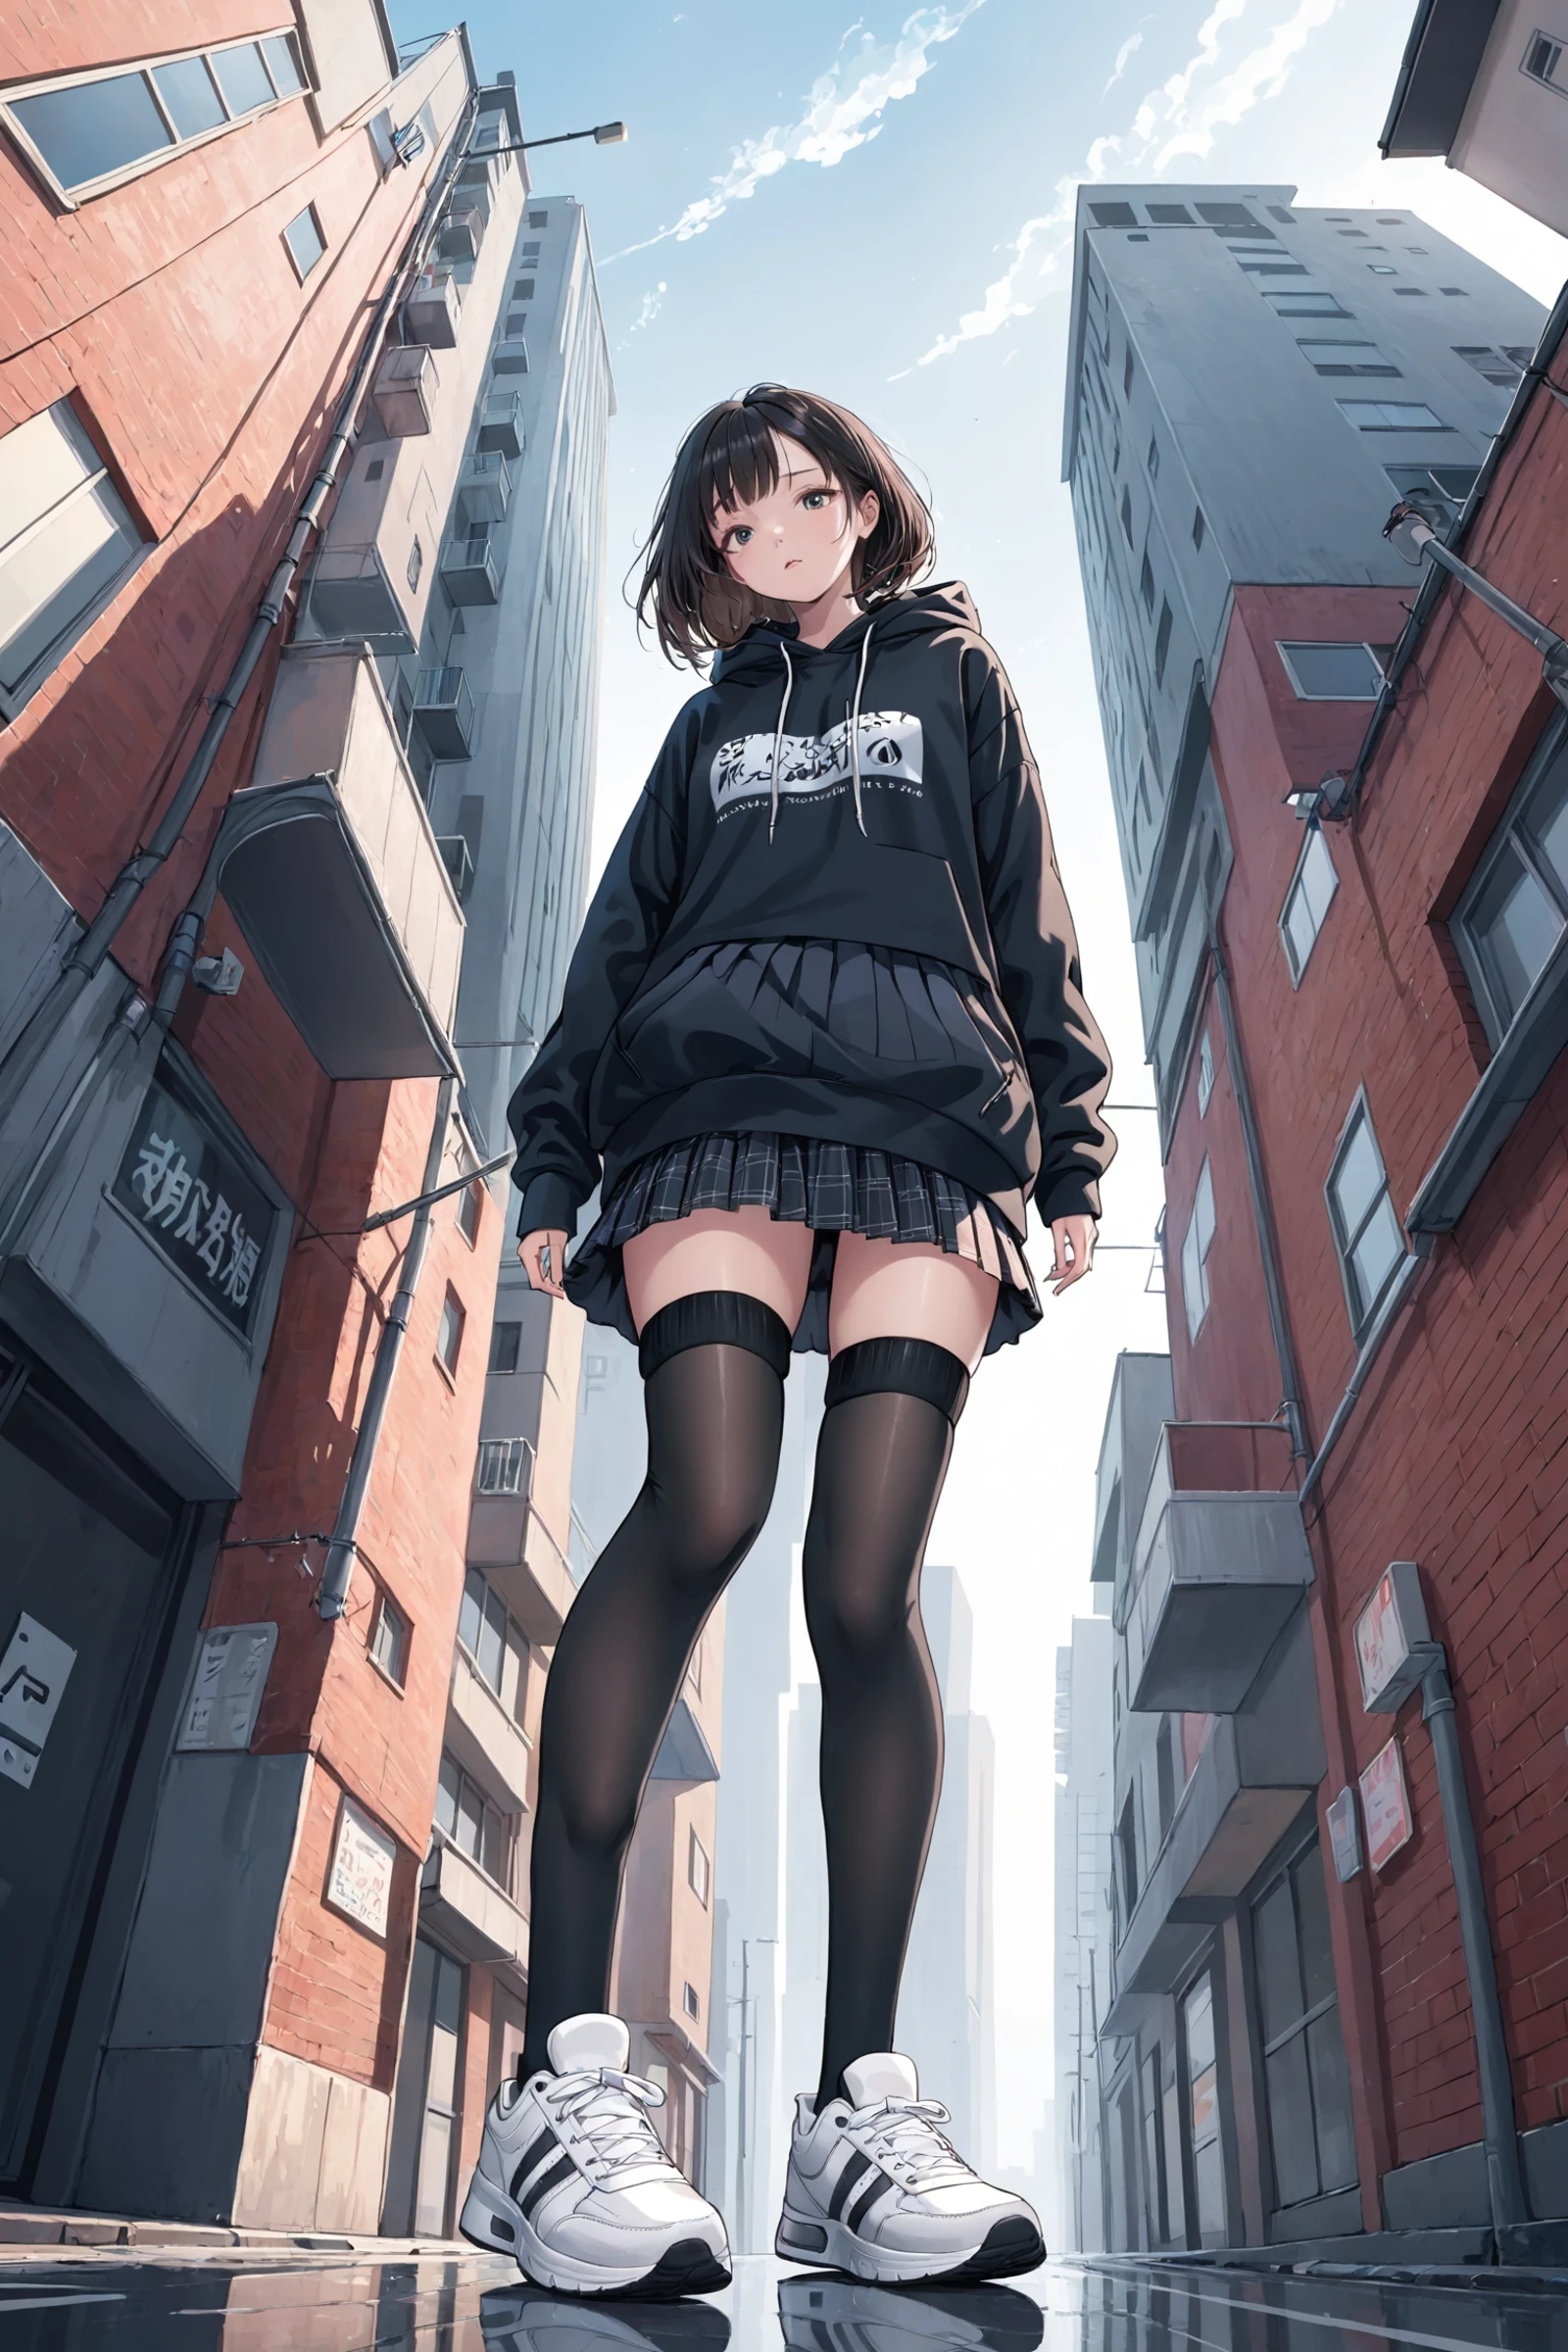 A young woman wearing a black hoodie and black stockings stands in an urban environment.